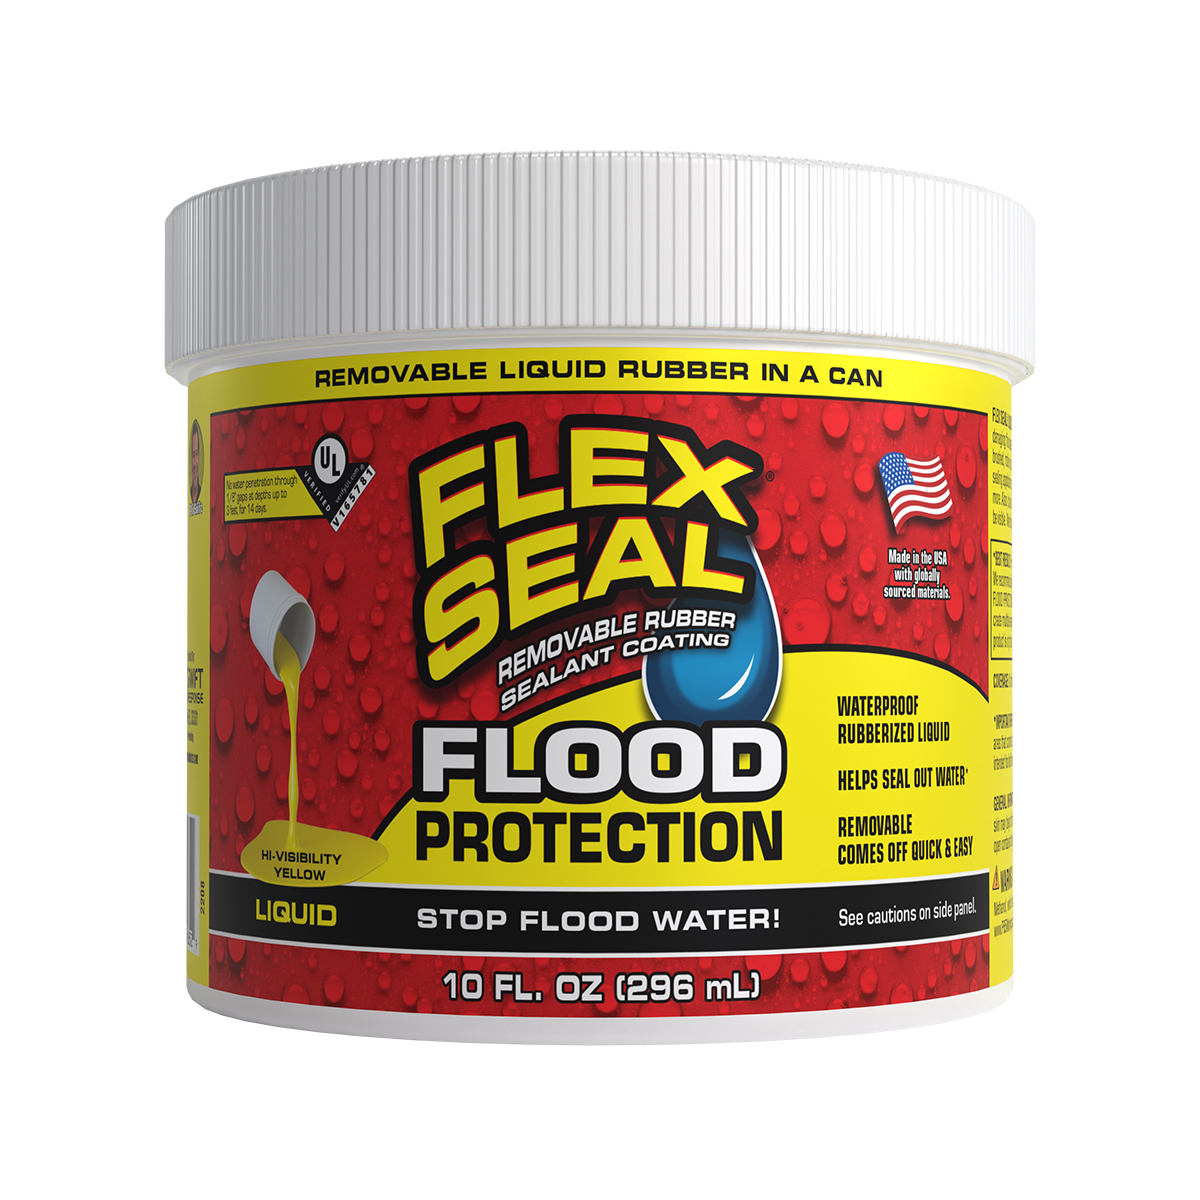 Flex Seal Liquid Flood Protection RPSYELR12 - Removable Waterproof Sealant Easy-Apply Liquid Rubber in a Can Hi-Vis Yellow - 10 